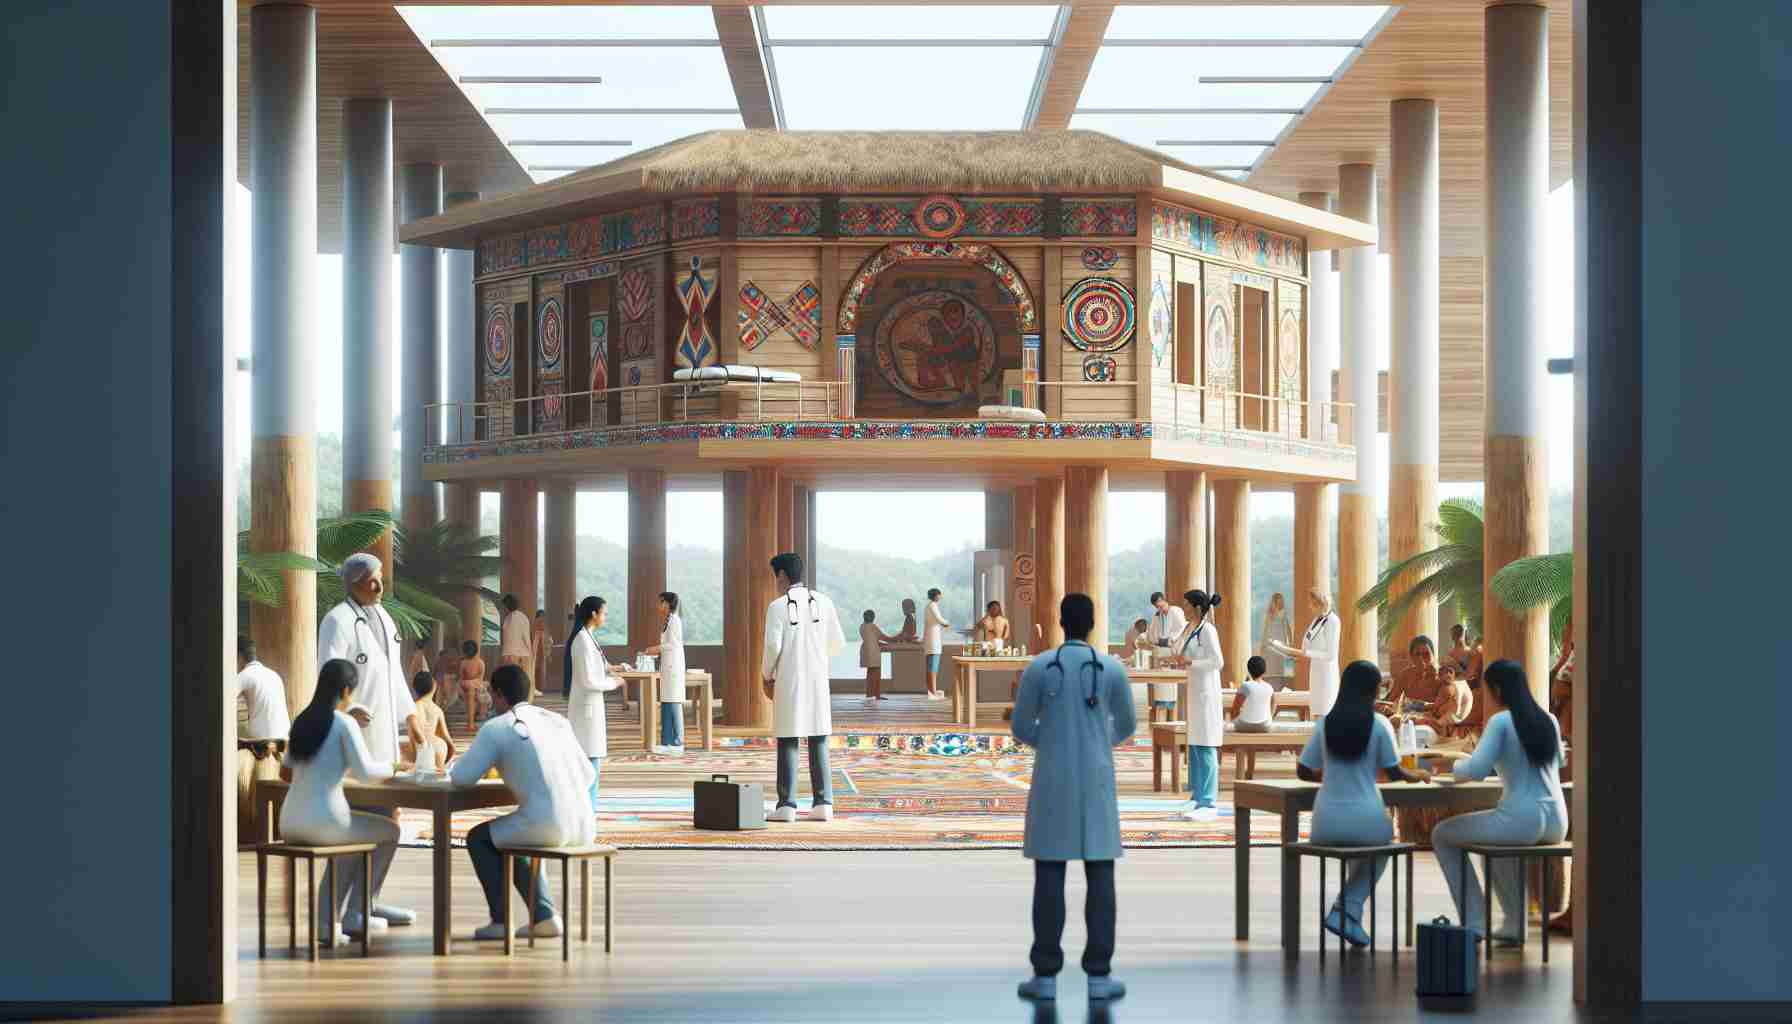 A high definition, realistic image showcasing healthcare initiatives in Indigenous communities. The scene should depict a modern clinic incorporating traditional structures and symbols in its architecture. Medical professionals of multiple descents, like Middle-Eastern, Hispanic, and South Asian, providing care to patients. There might be an area showing traditional medicinal practices being taught or performed. Represent respect for the cultural heritage and advancement in healthcare technology equally.